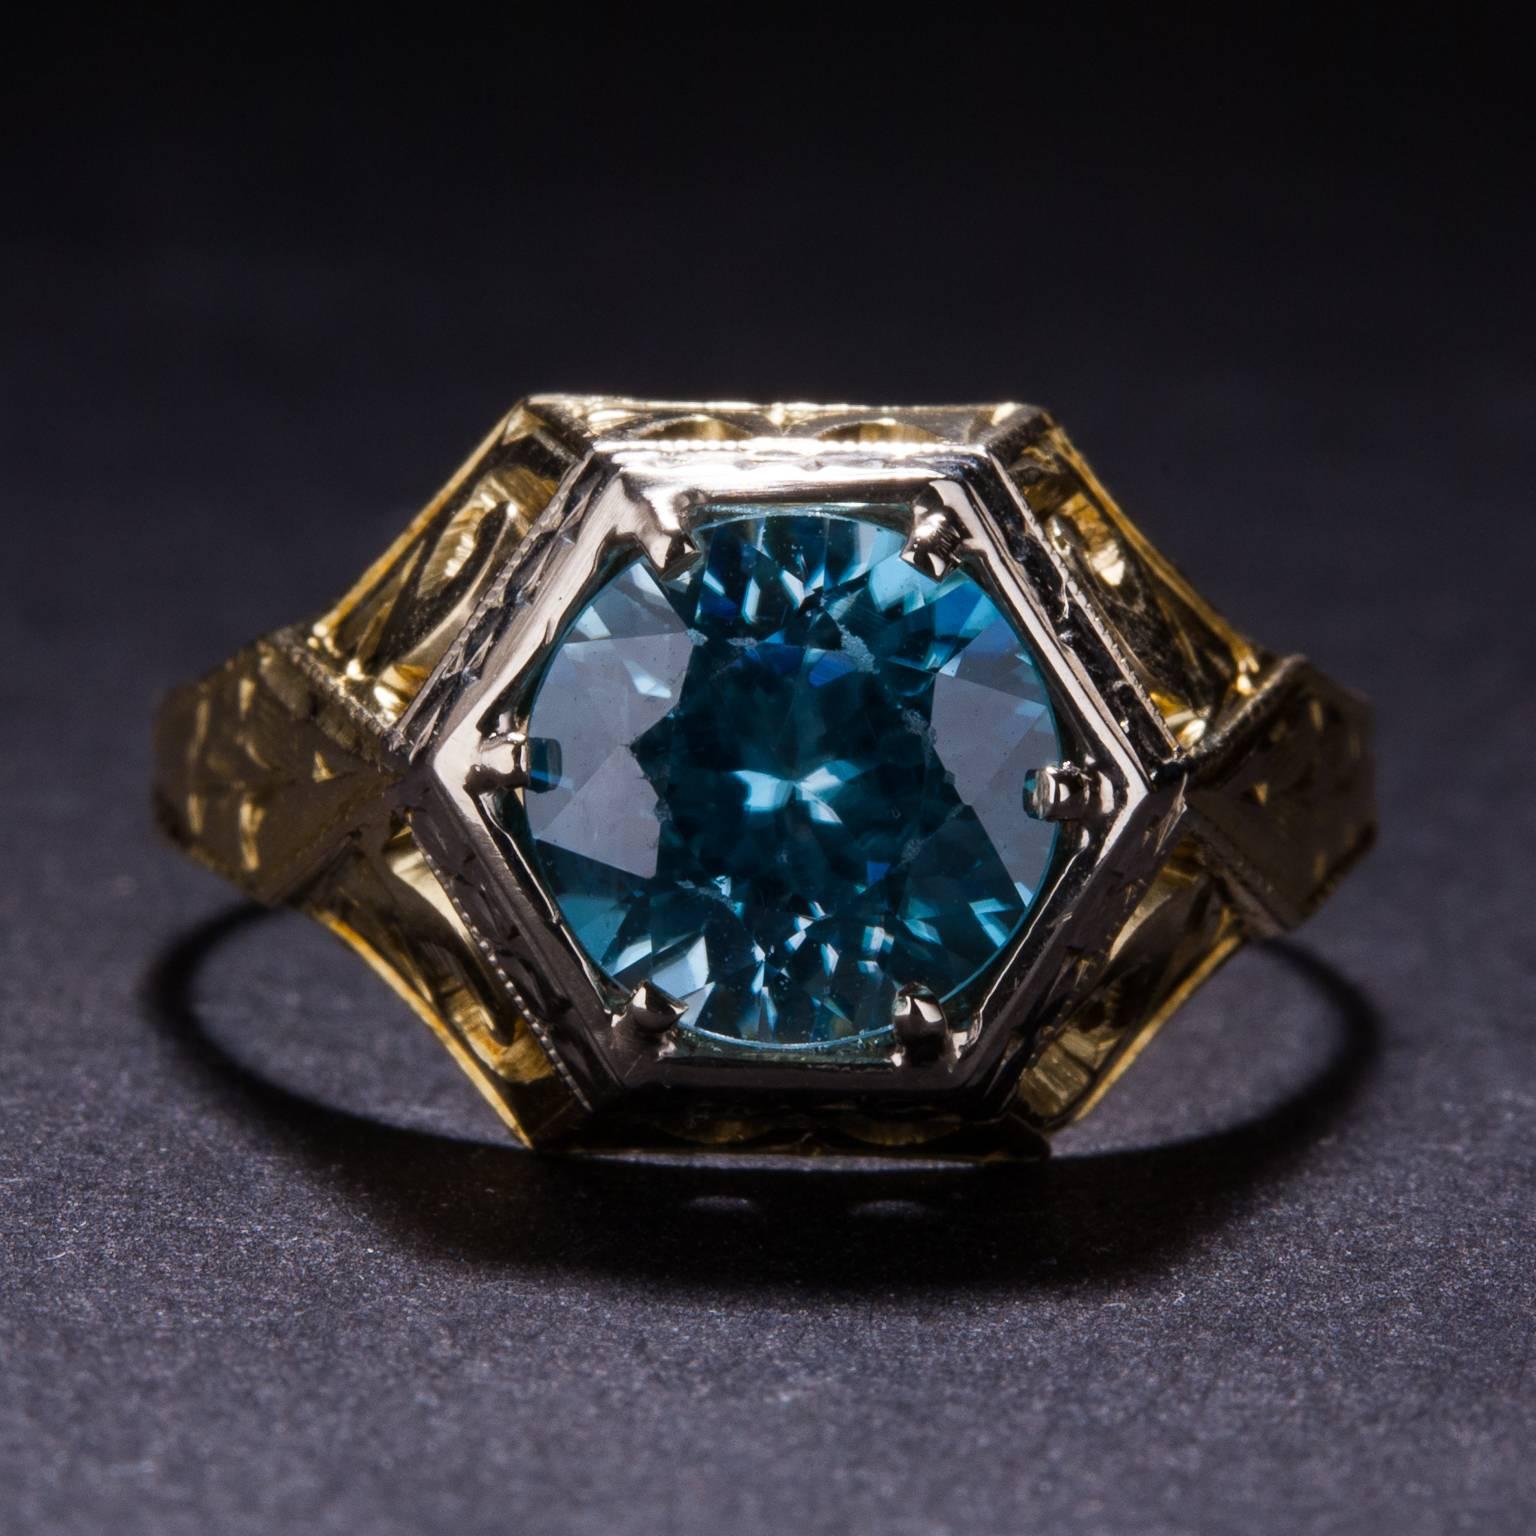 This extraordinary ring features a 2.00 carat blue zircon set in a 10k two-tone gold mounting. This piece has stunning hand-engraved details and is currently size 6.5.